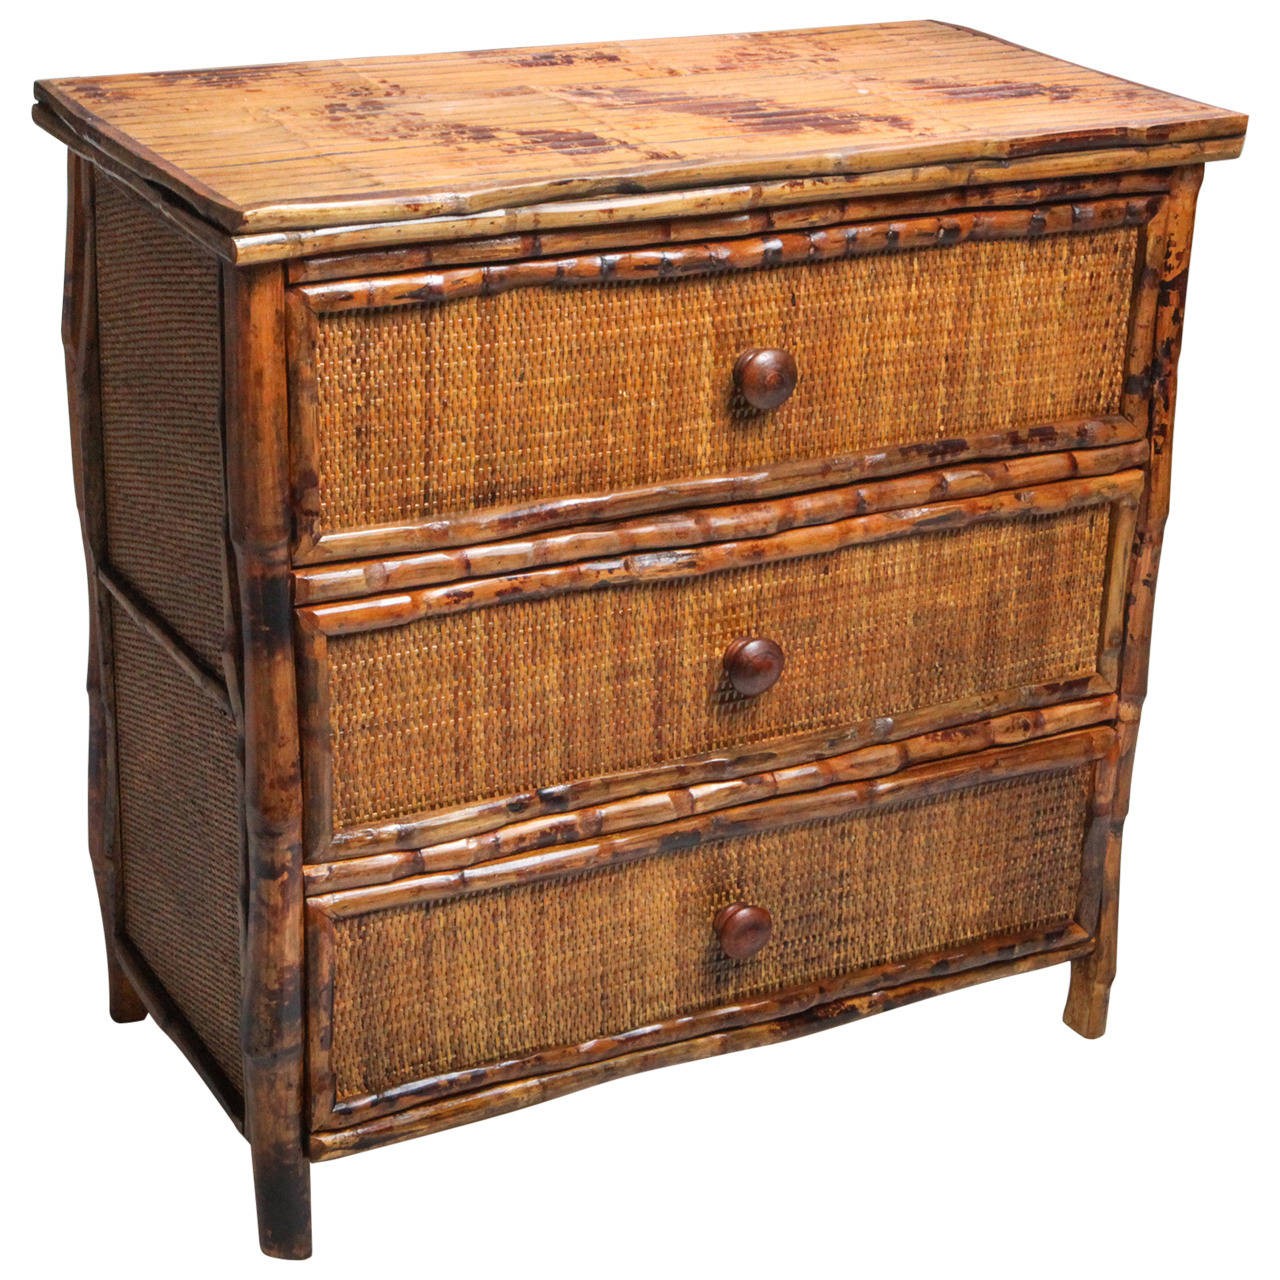 Bamboo rattan chest at 1stdibs